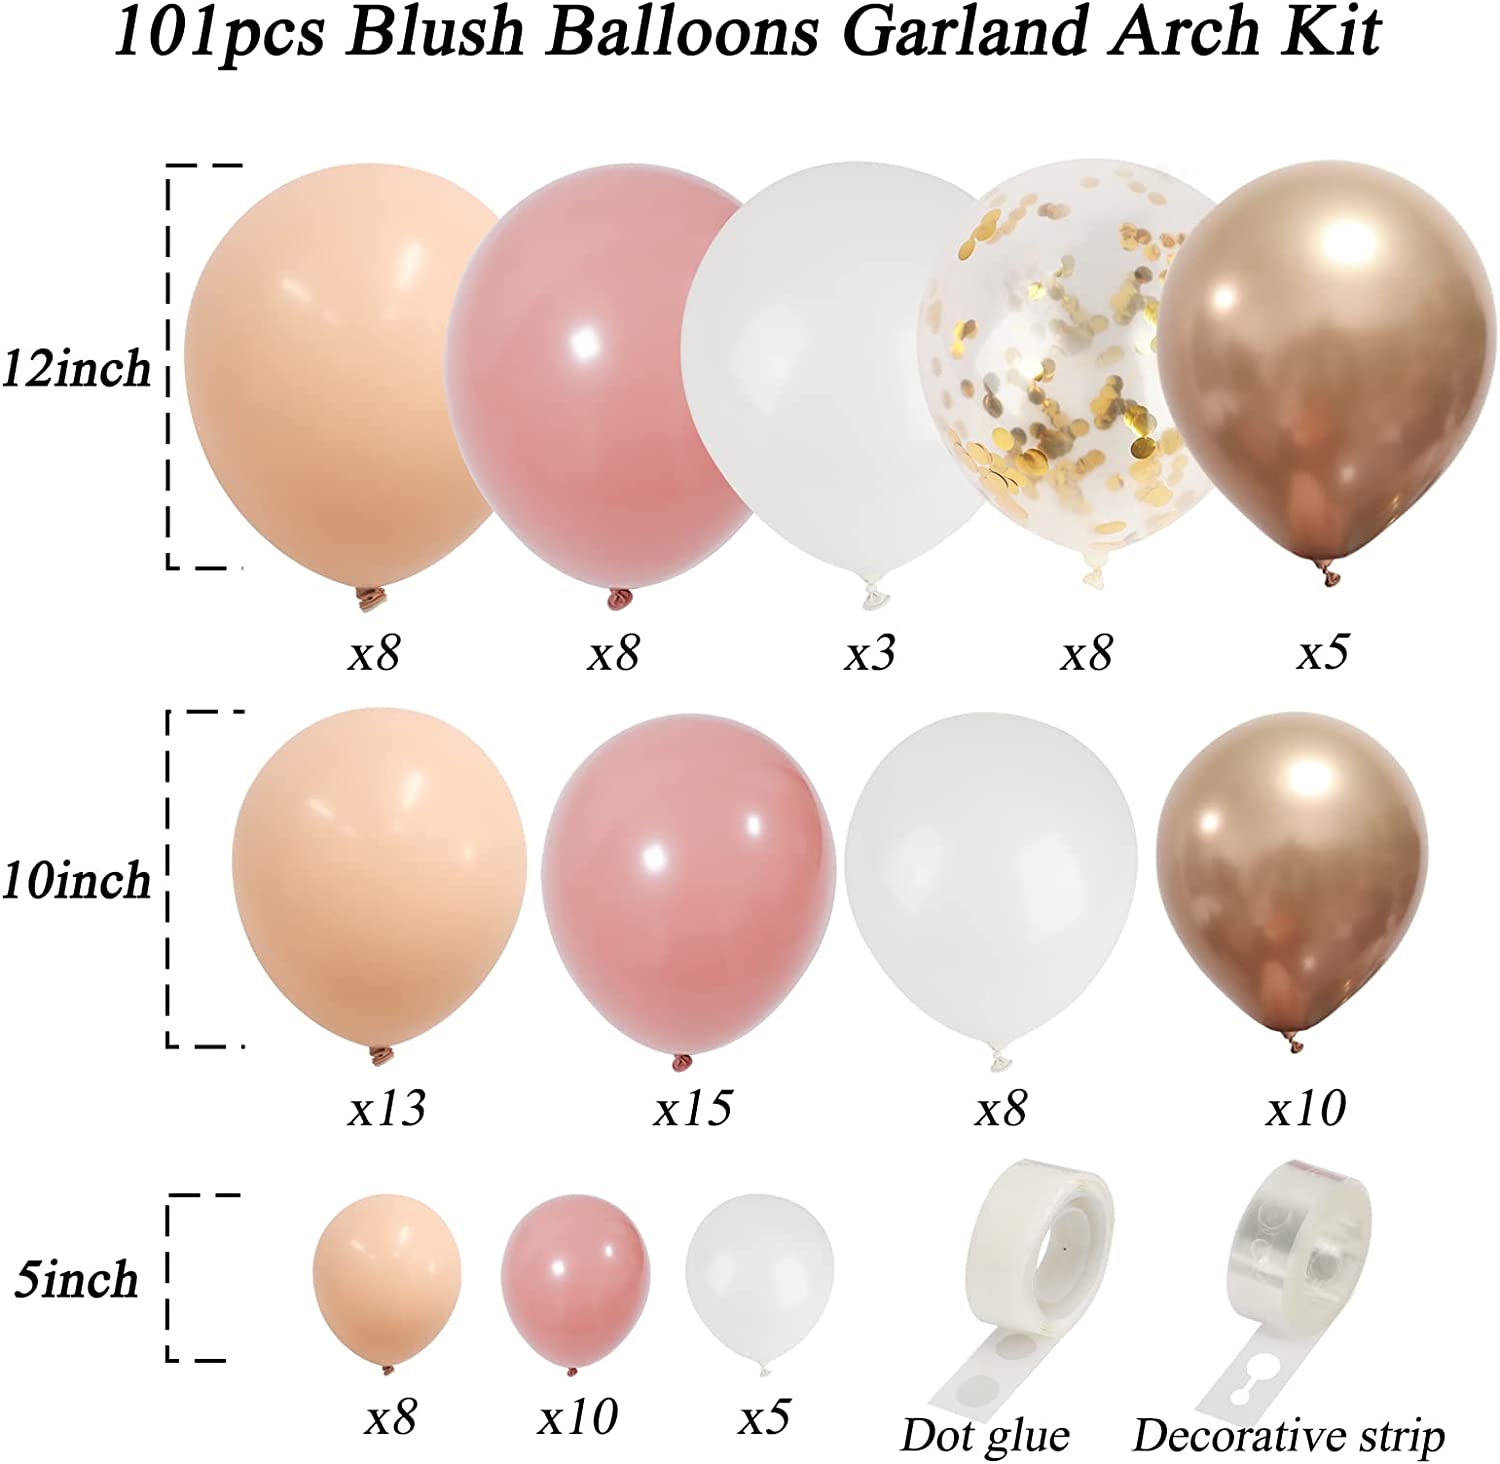 This is a set of 3 sets of blush balloons garland arch kits, perfect for girls&